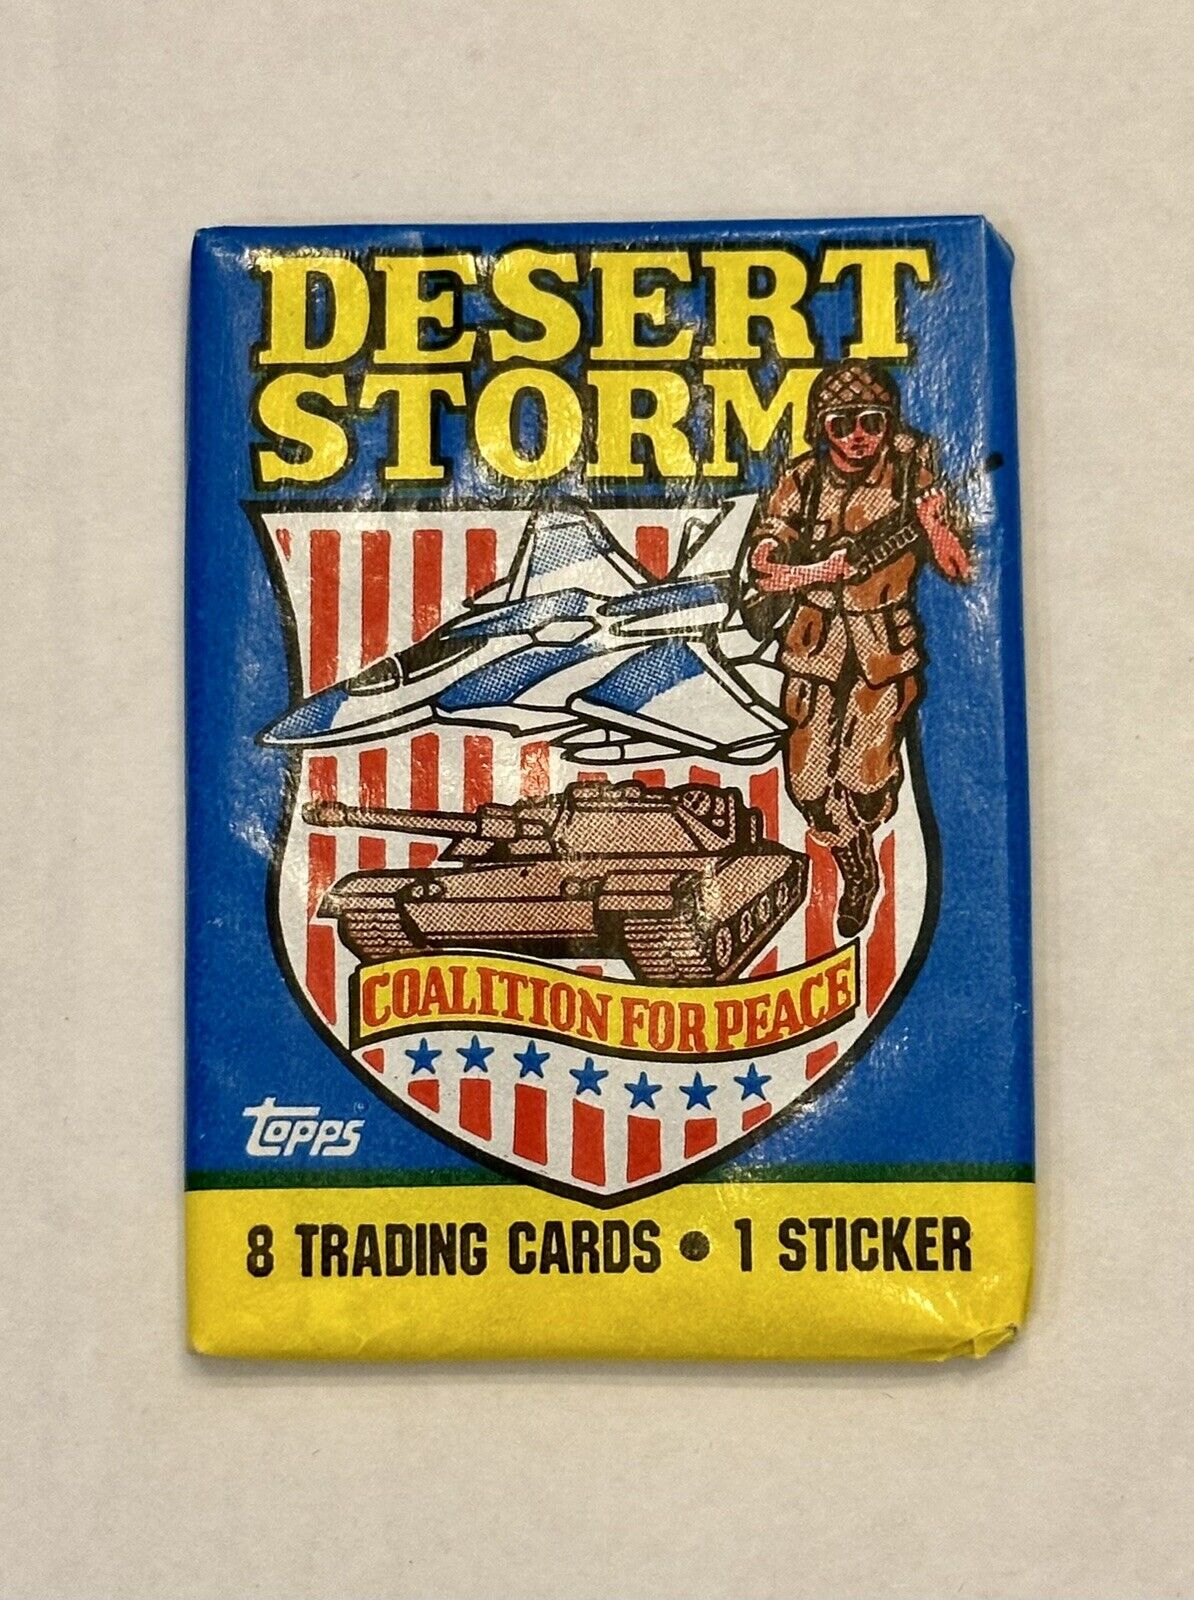 1991 Topps Desert Storm Single Wax Pack. Made And Printed In The U.S.A.